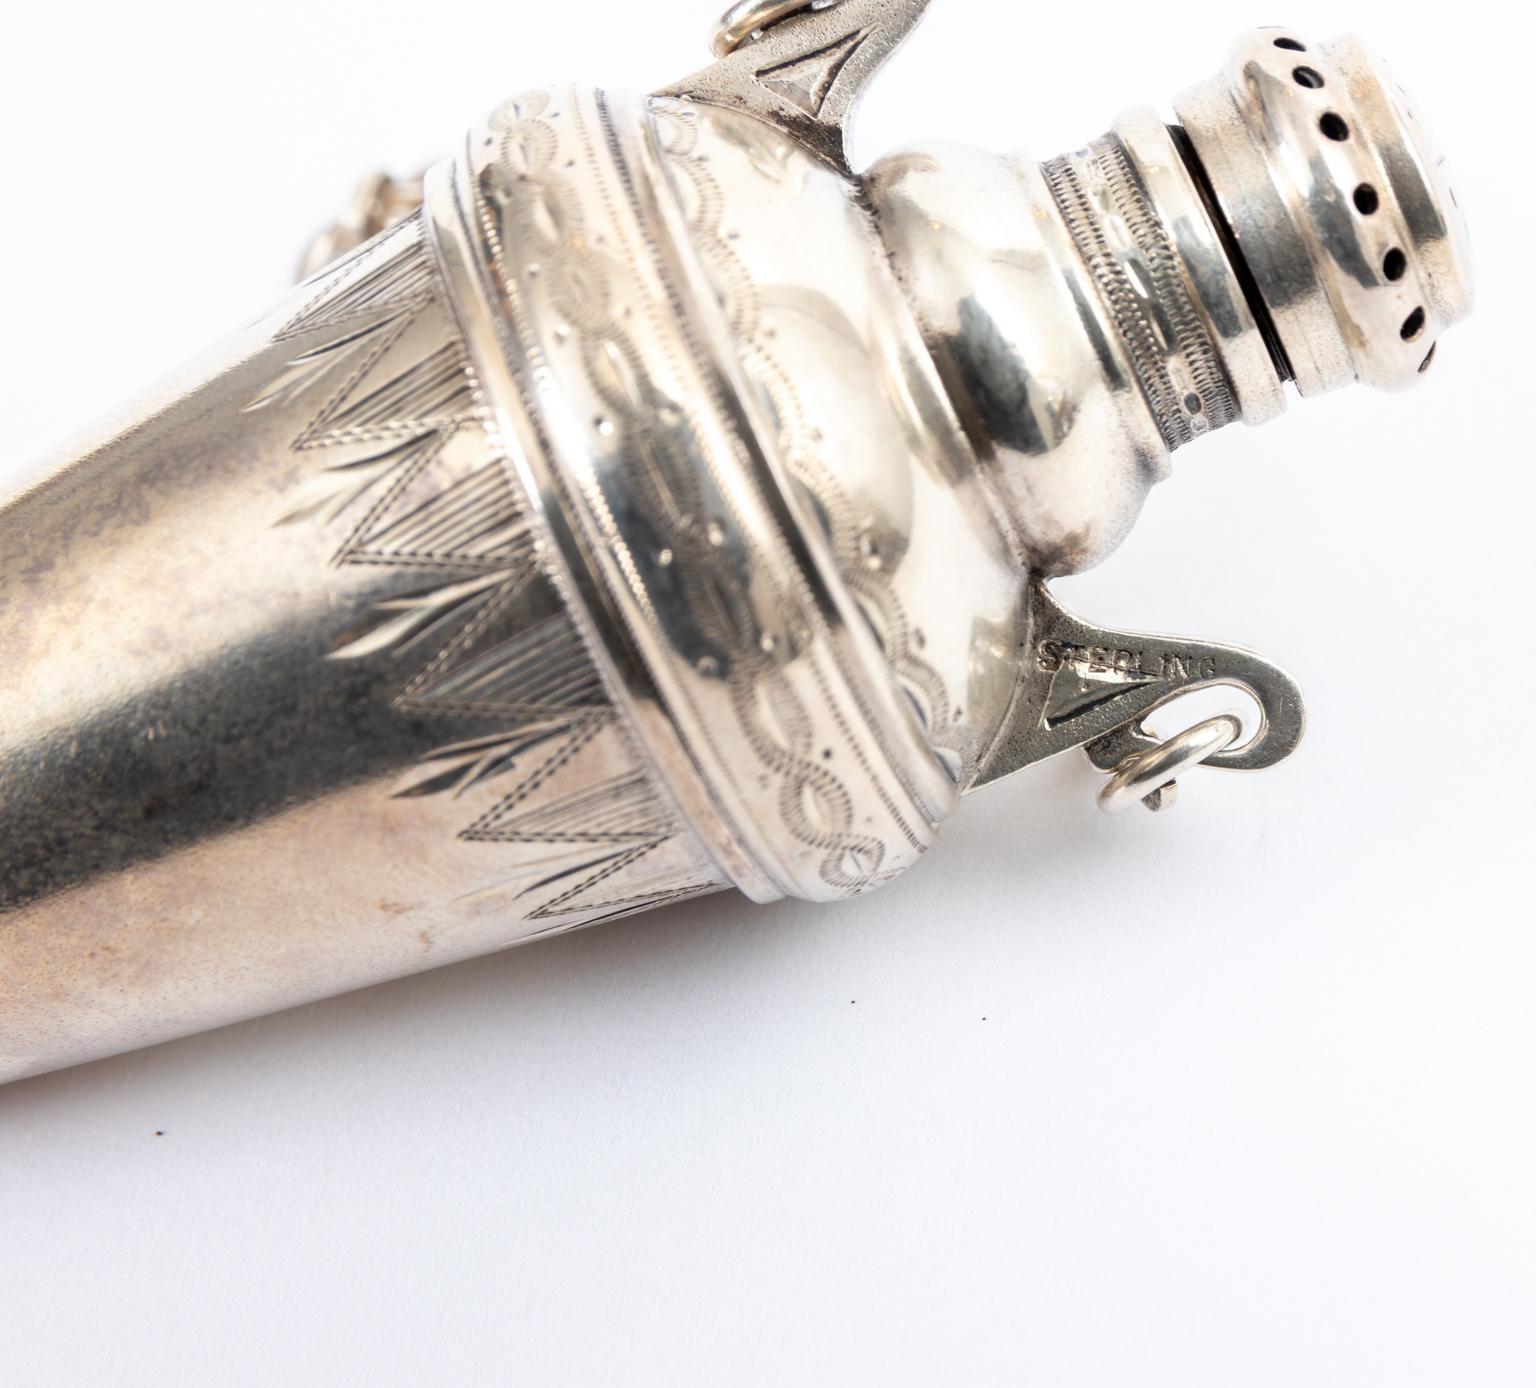 Engraved sterling silver chatelaine perfume vinaigrette decorated with beaded and geometric trim, circa 1890s-1920s. The piece measures 3.25 inches height excluding the chain, the width is 1.50 inches including handles and the depth is 1.25 inches.